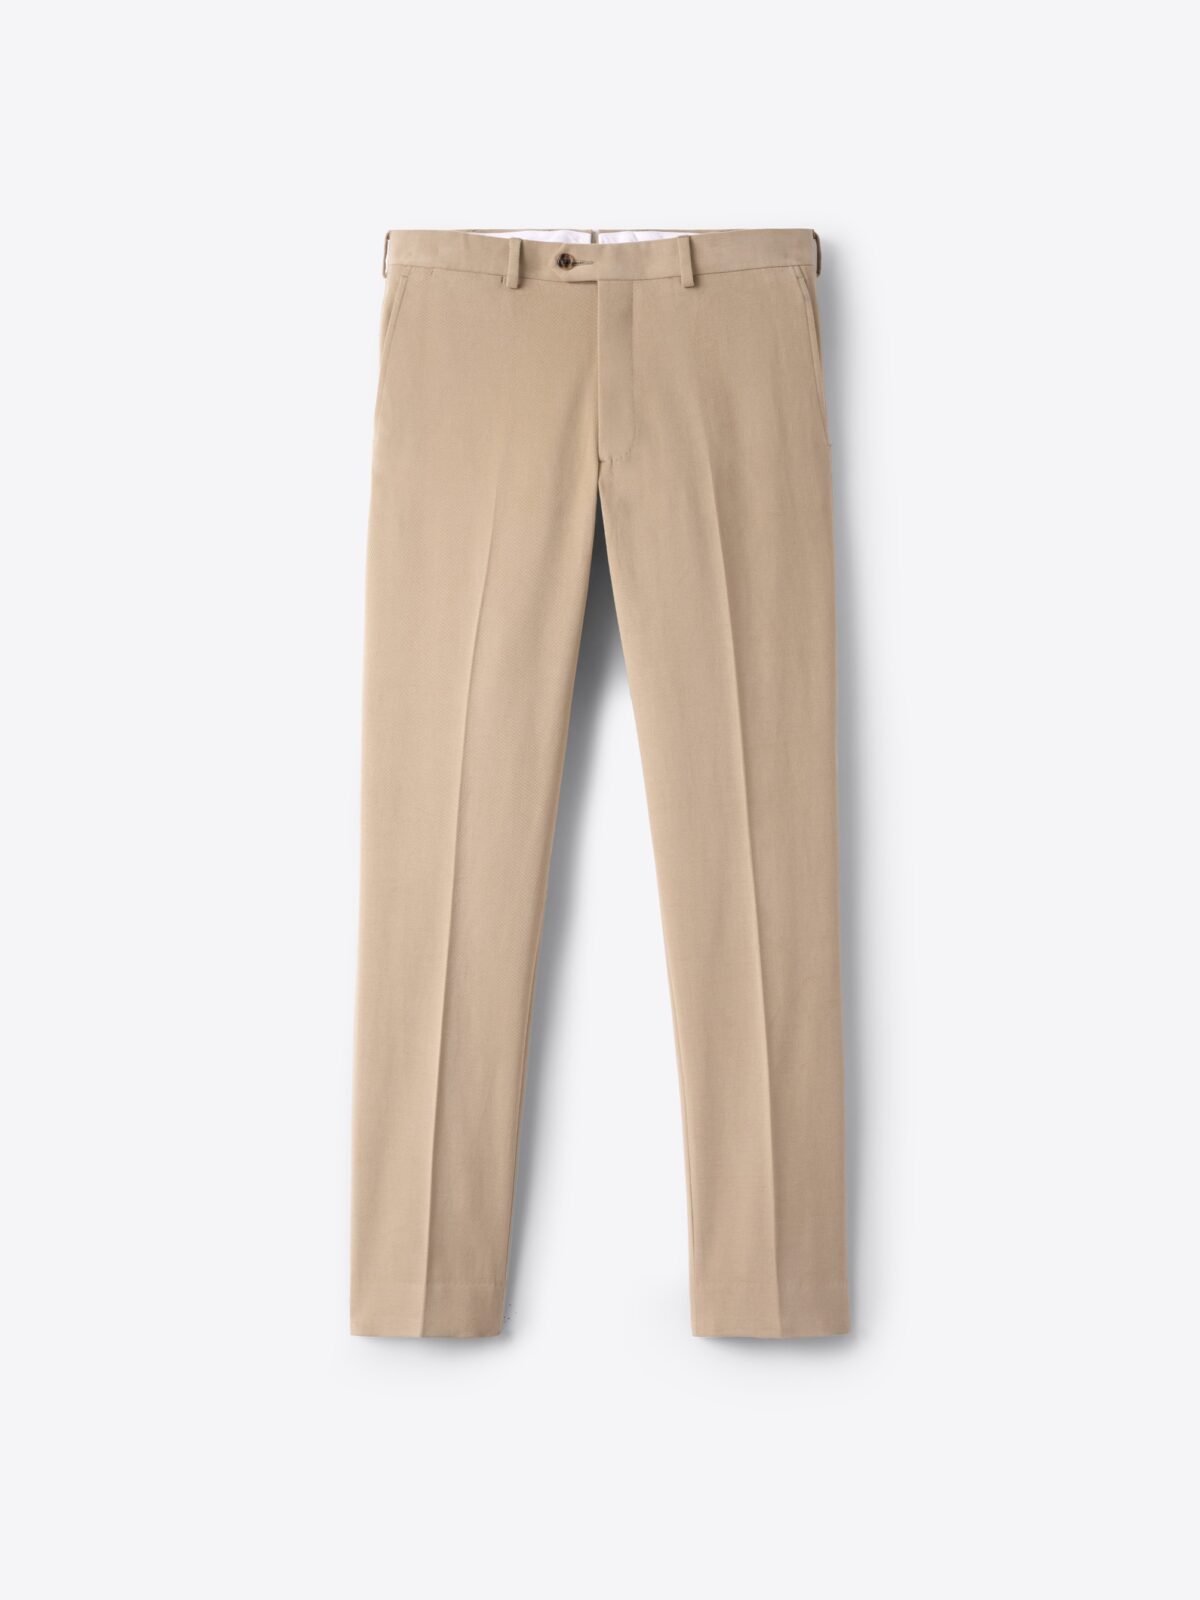 Beige Brushed Heavy Stretch Cotton Dress Pant